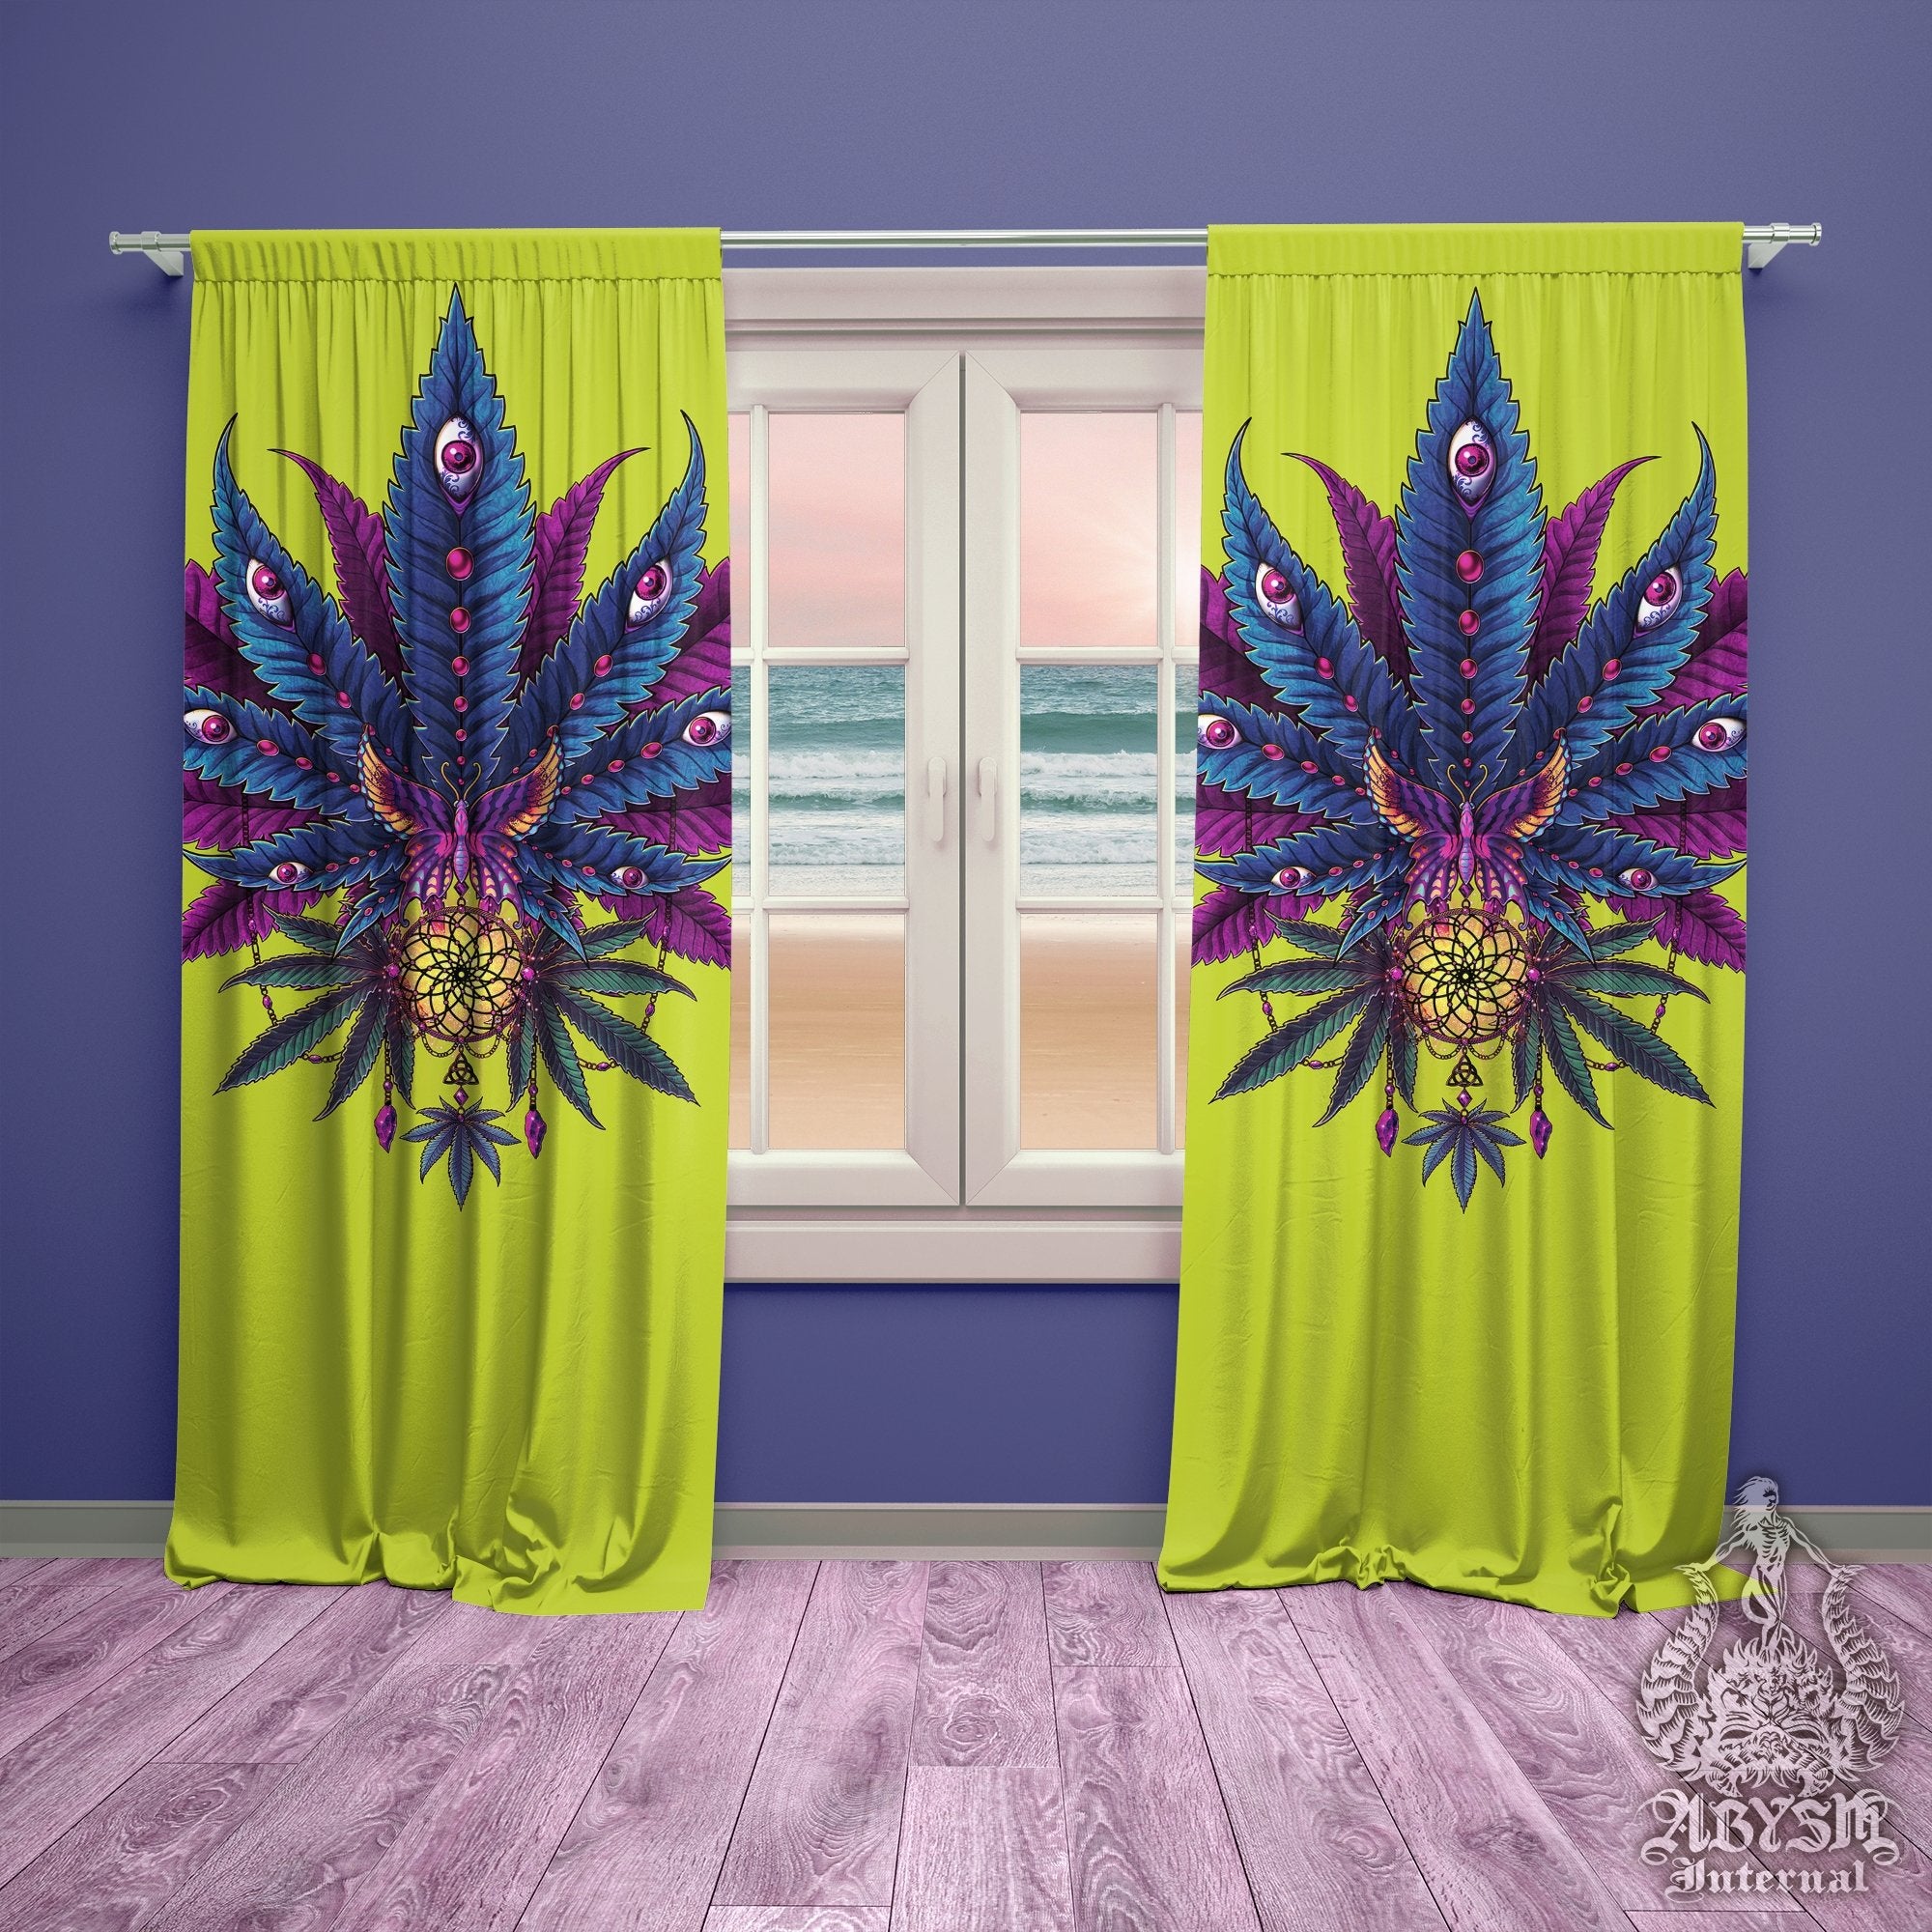 Weed Blackout Curtains, Cannabis Home and Shop Decor, Long Window Panels, Psychedelic Print, 420 Room 80s Art - Neon II - Abysm Internal